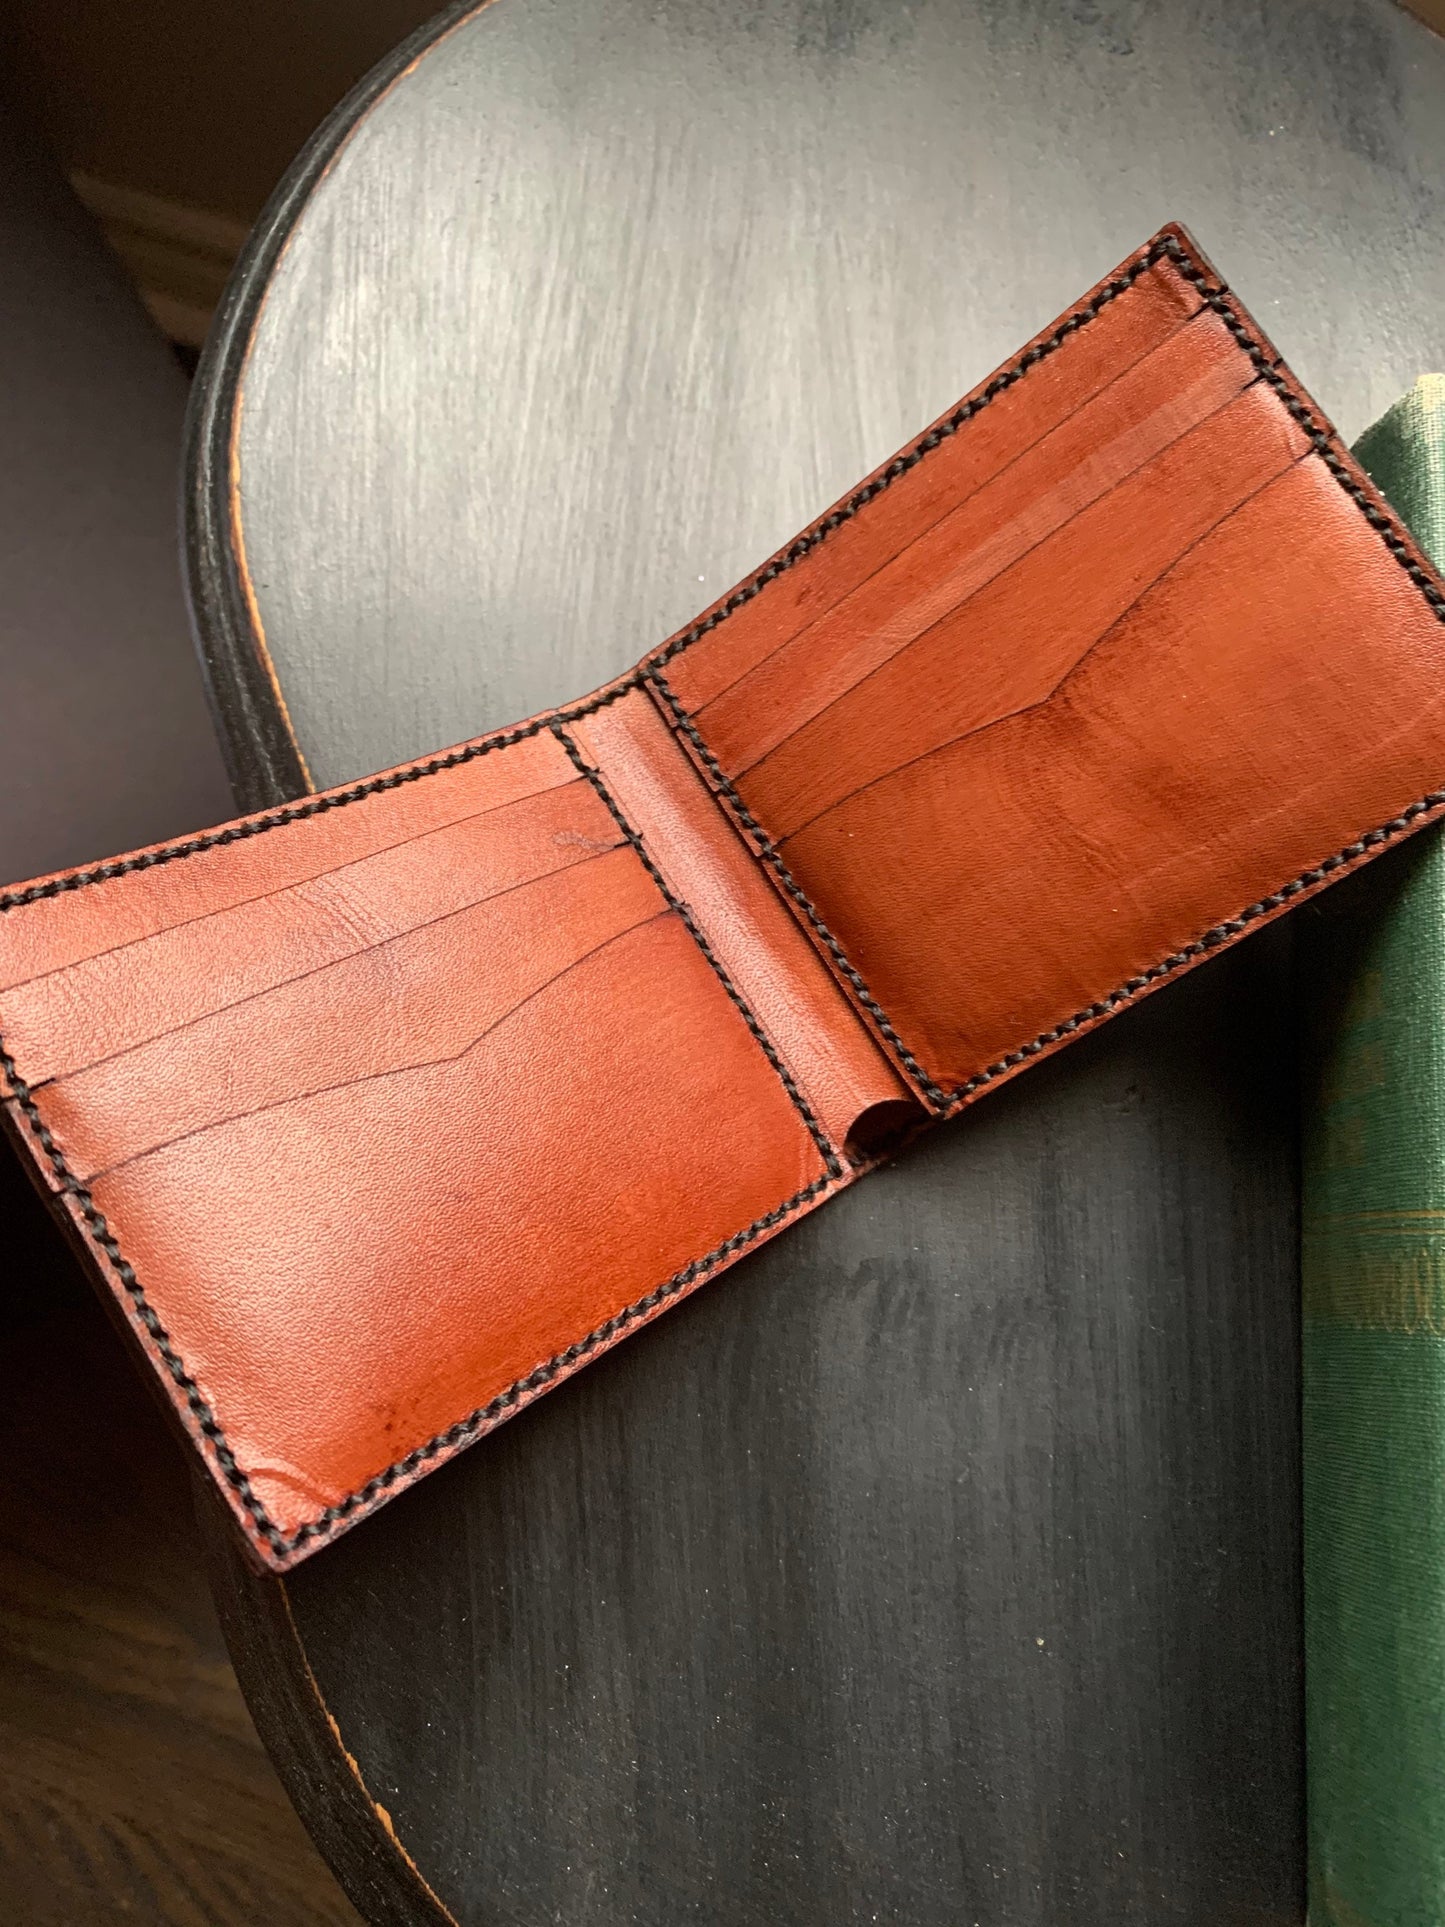 Custom Leather Wallet, Personalized Gift for Him/Men/Husband/Boyfriend/Dad/Anniversary/Fathers Day/Graduation/Birthday/Son